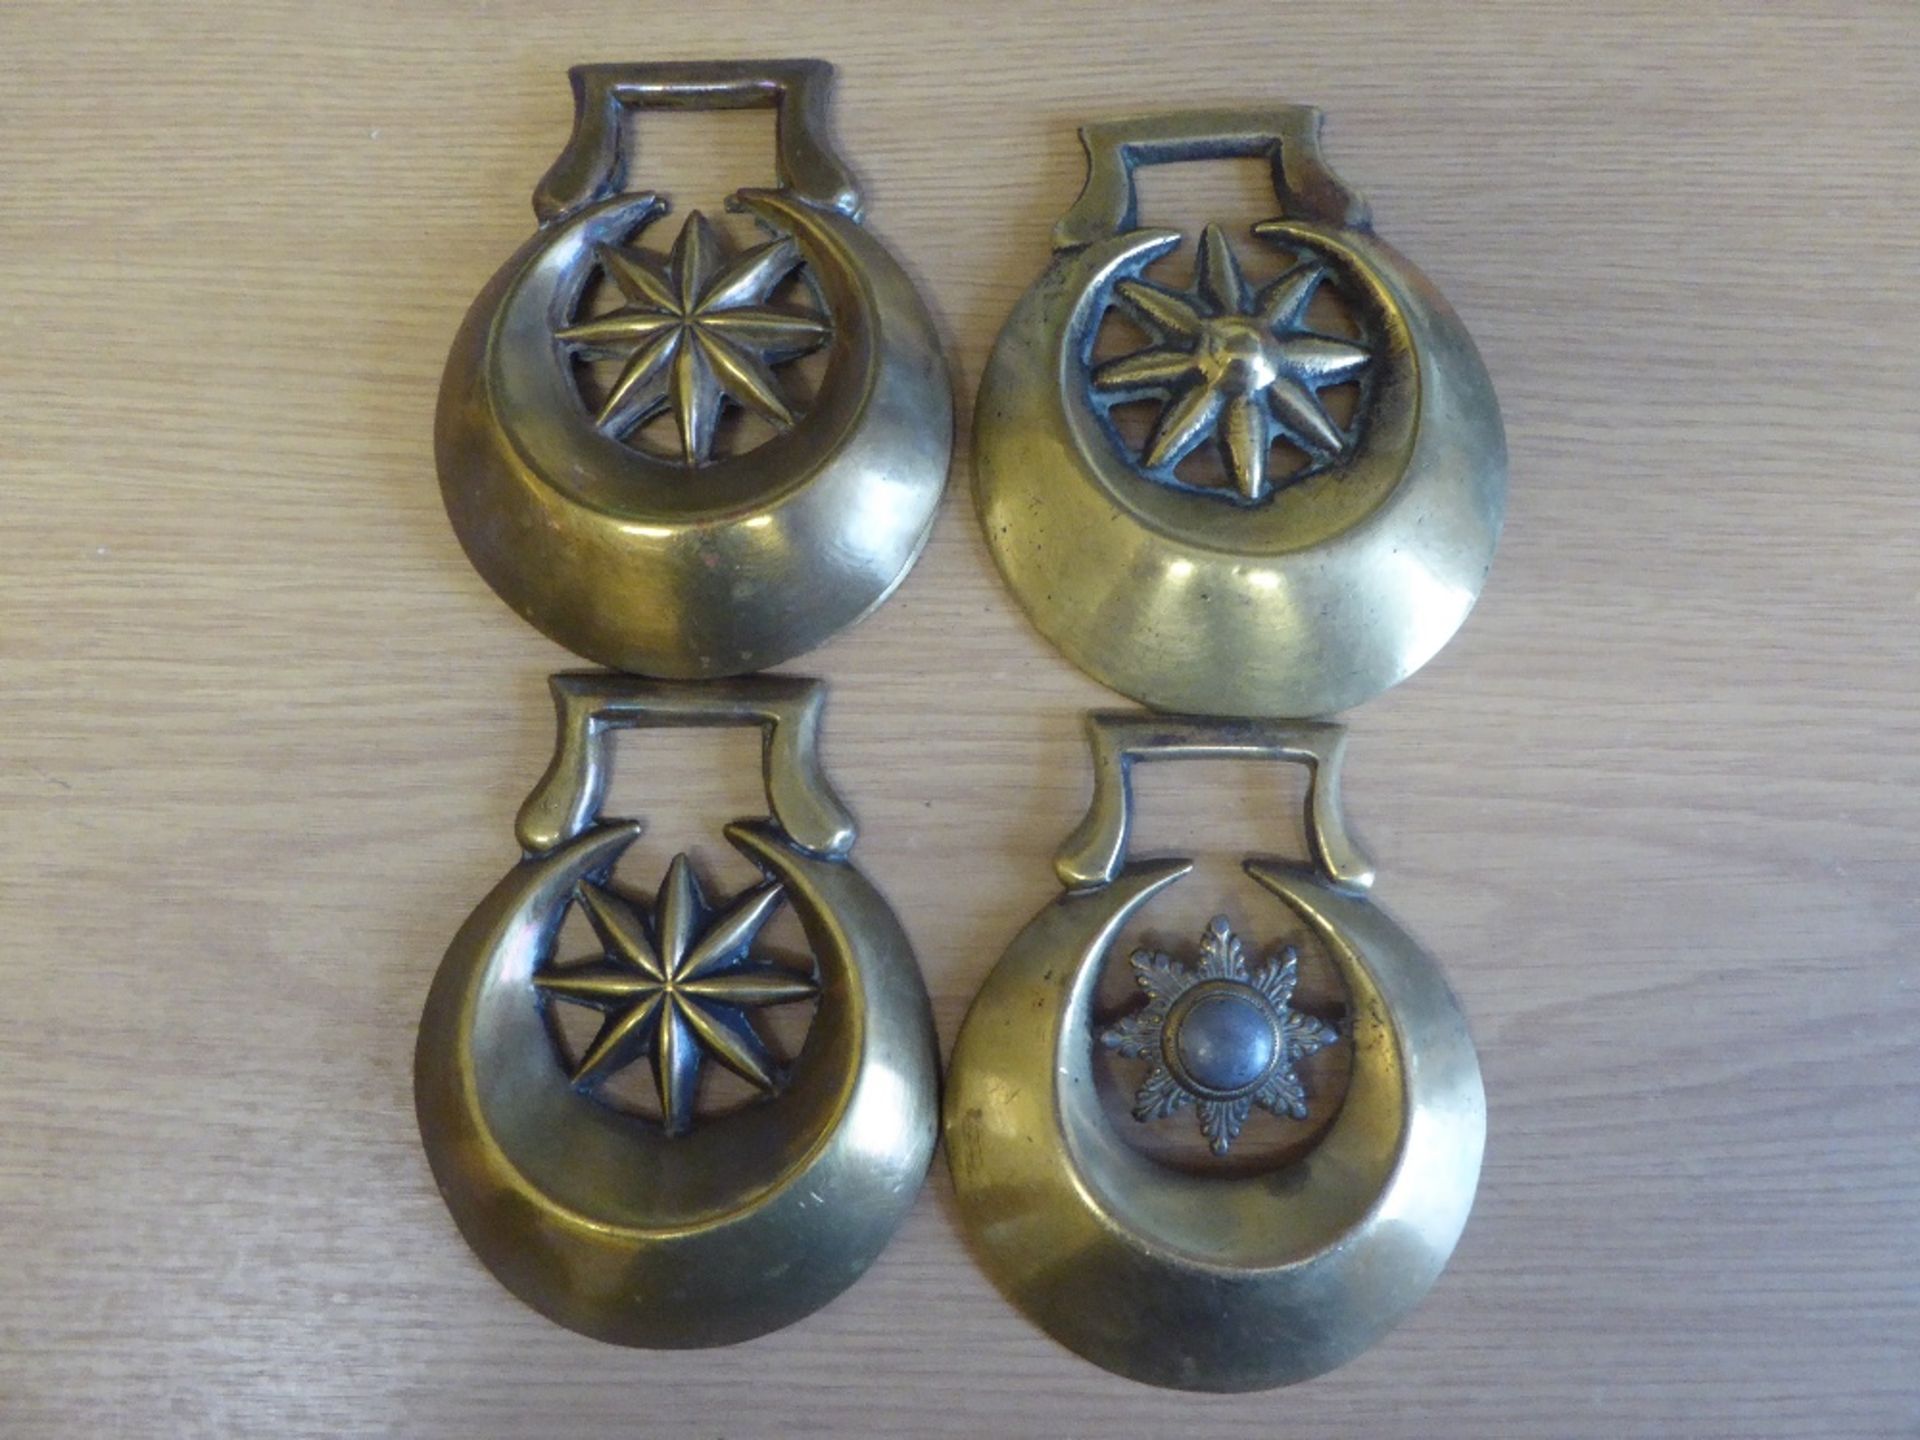 4 x stamped crescent-shaped brasses each with eight-sided centre star and 1 other crescent cast bras